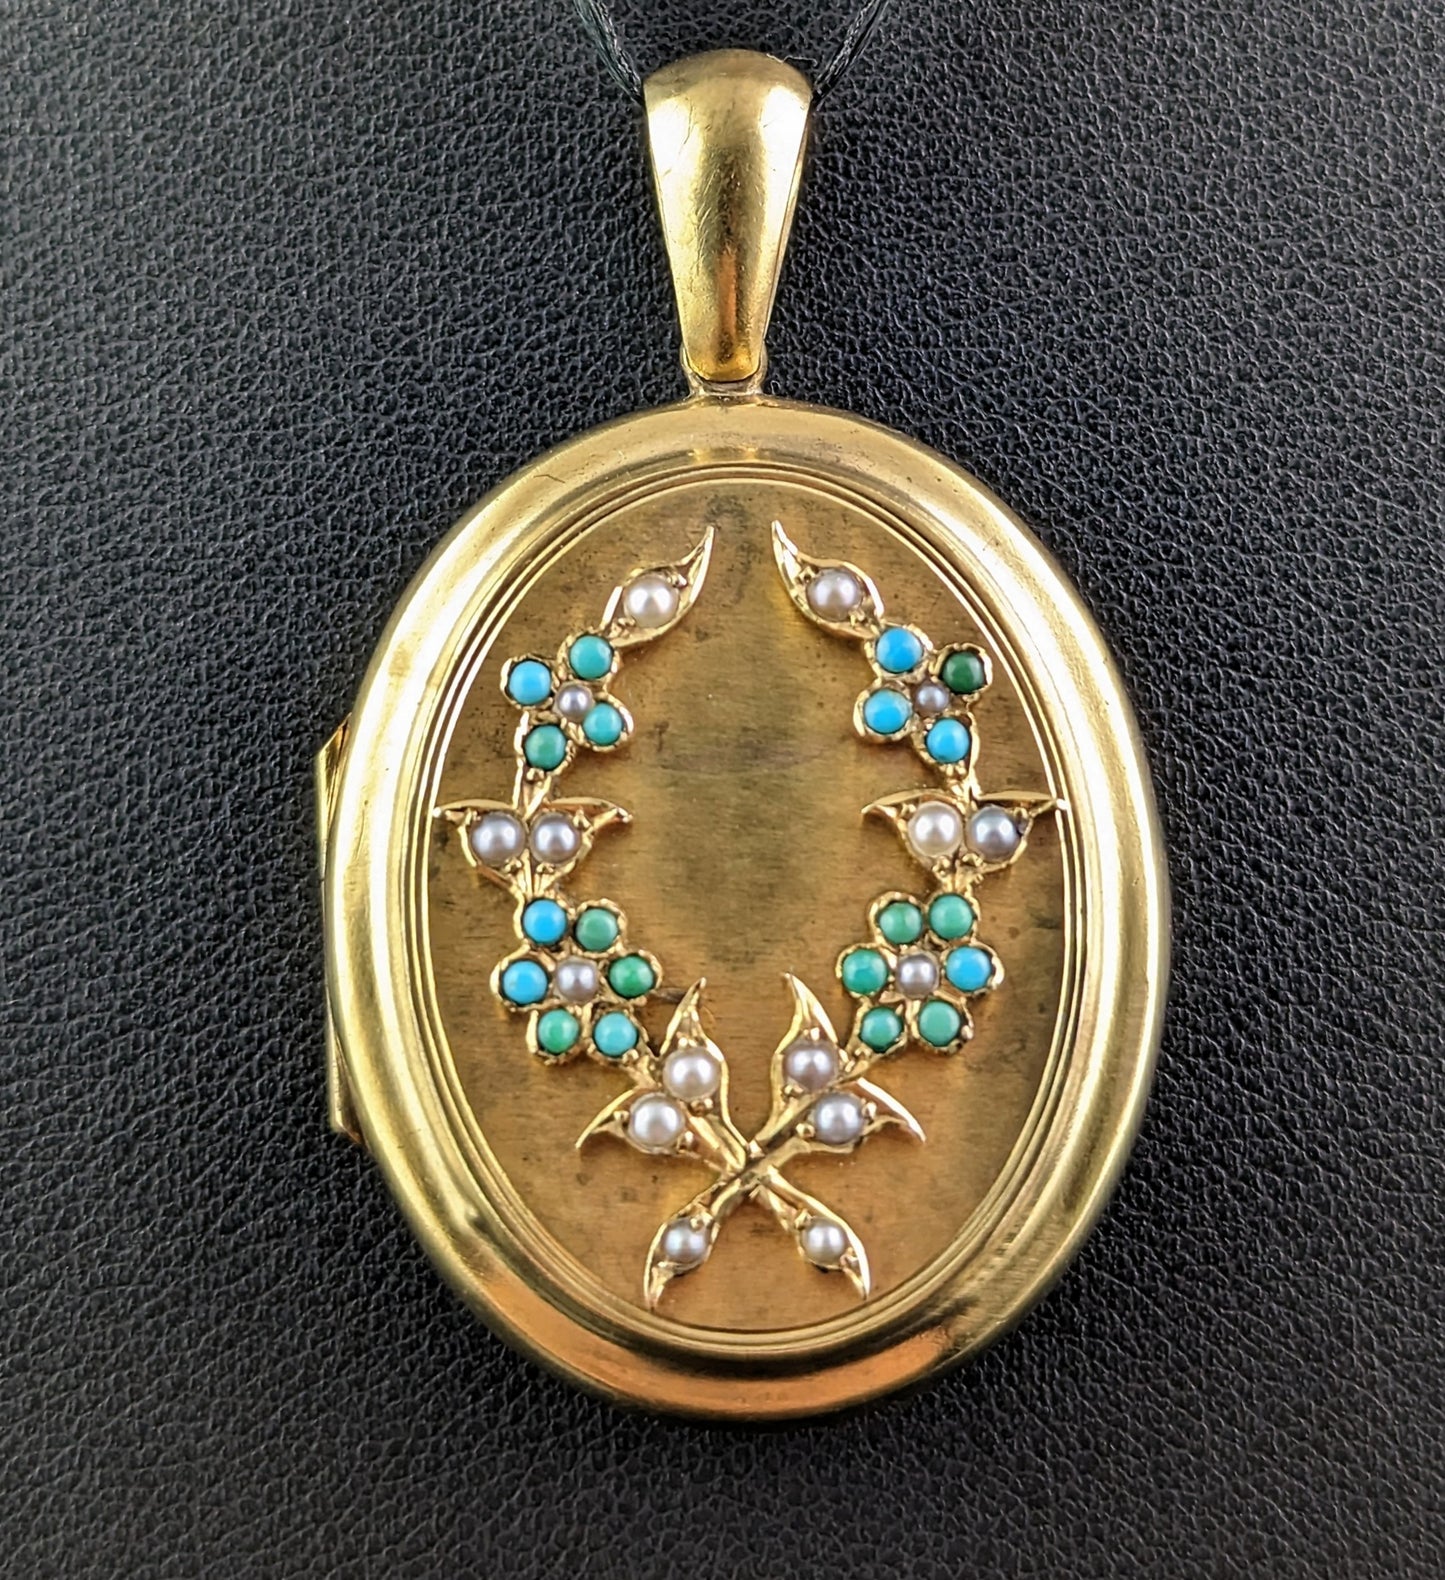 Antique 15ct gold locket, Turquoise and Pearl, Forget me not, Portrait